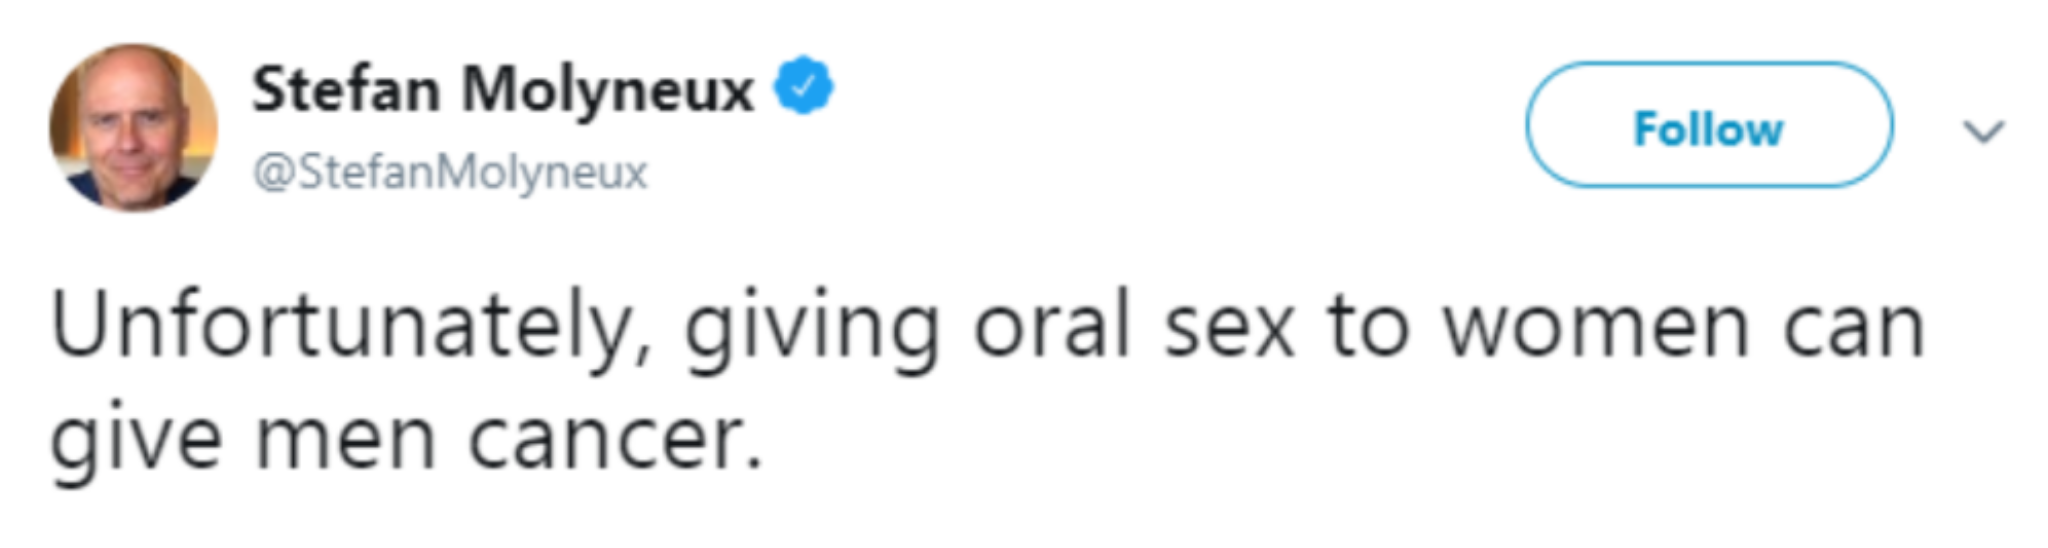 69 joke meaning - Stefan Molyneux Molyneux Unfortunately, giving oral sex to women can give men cancer.